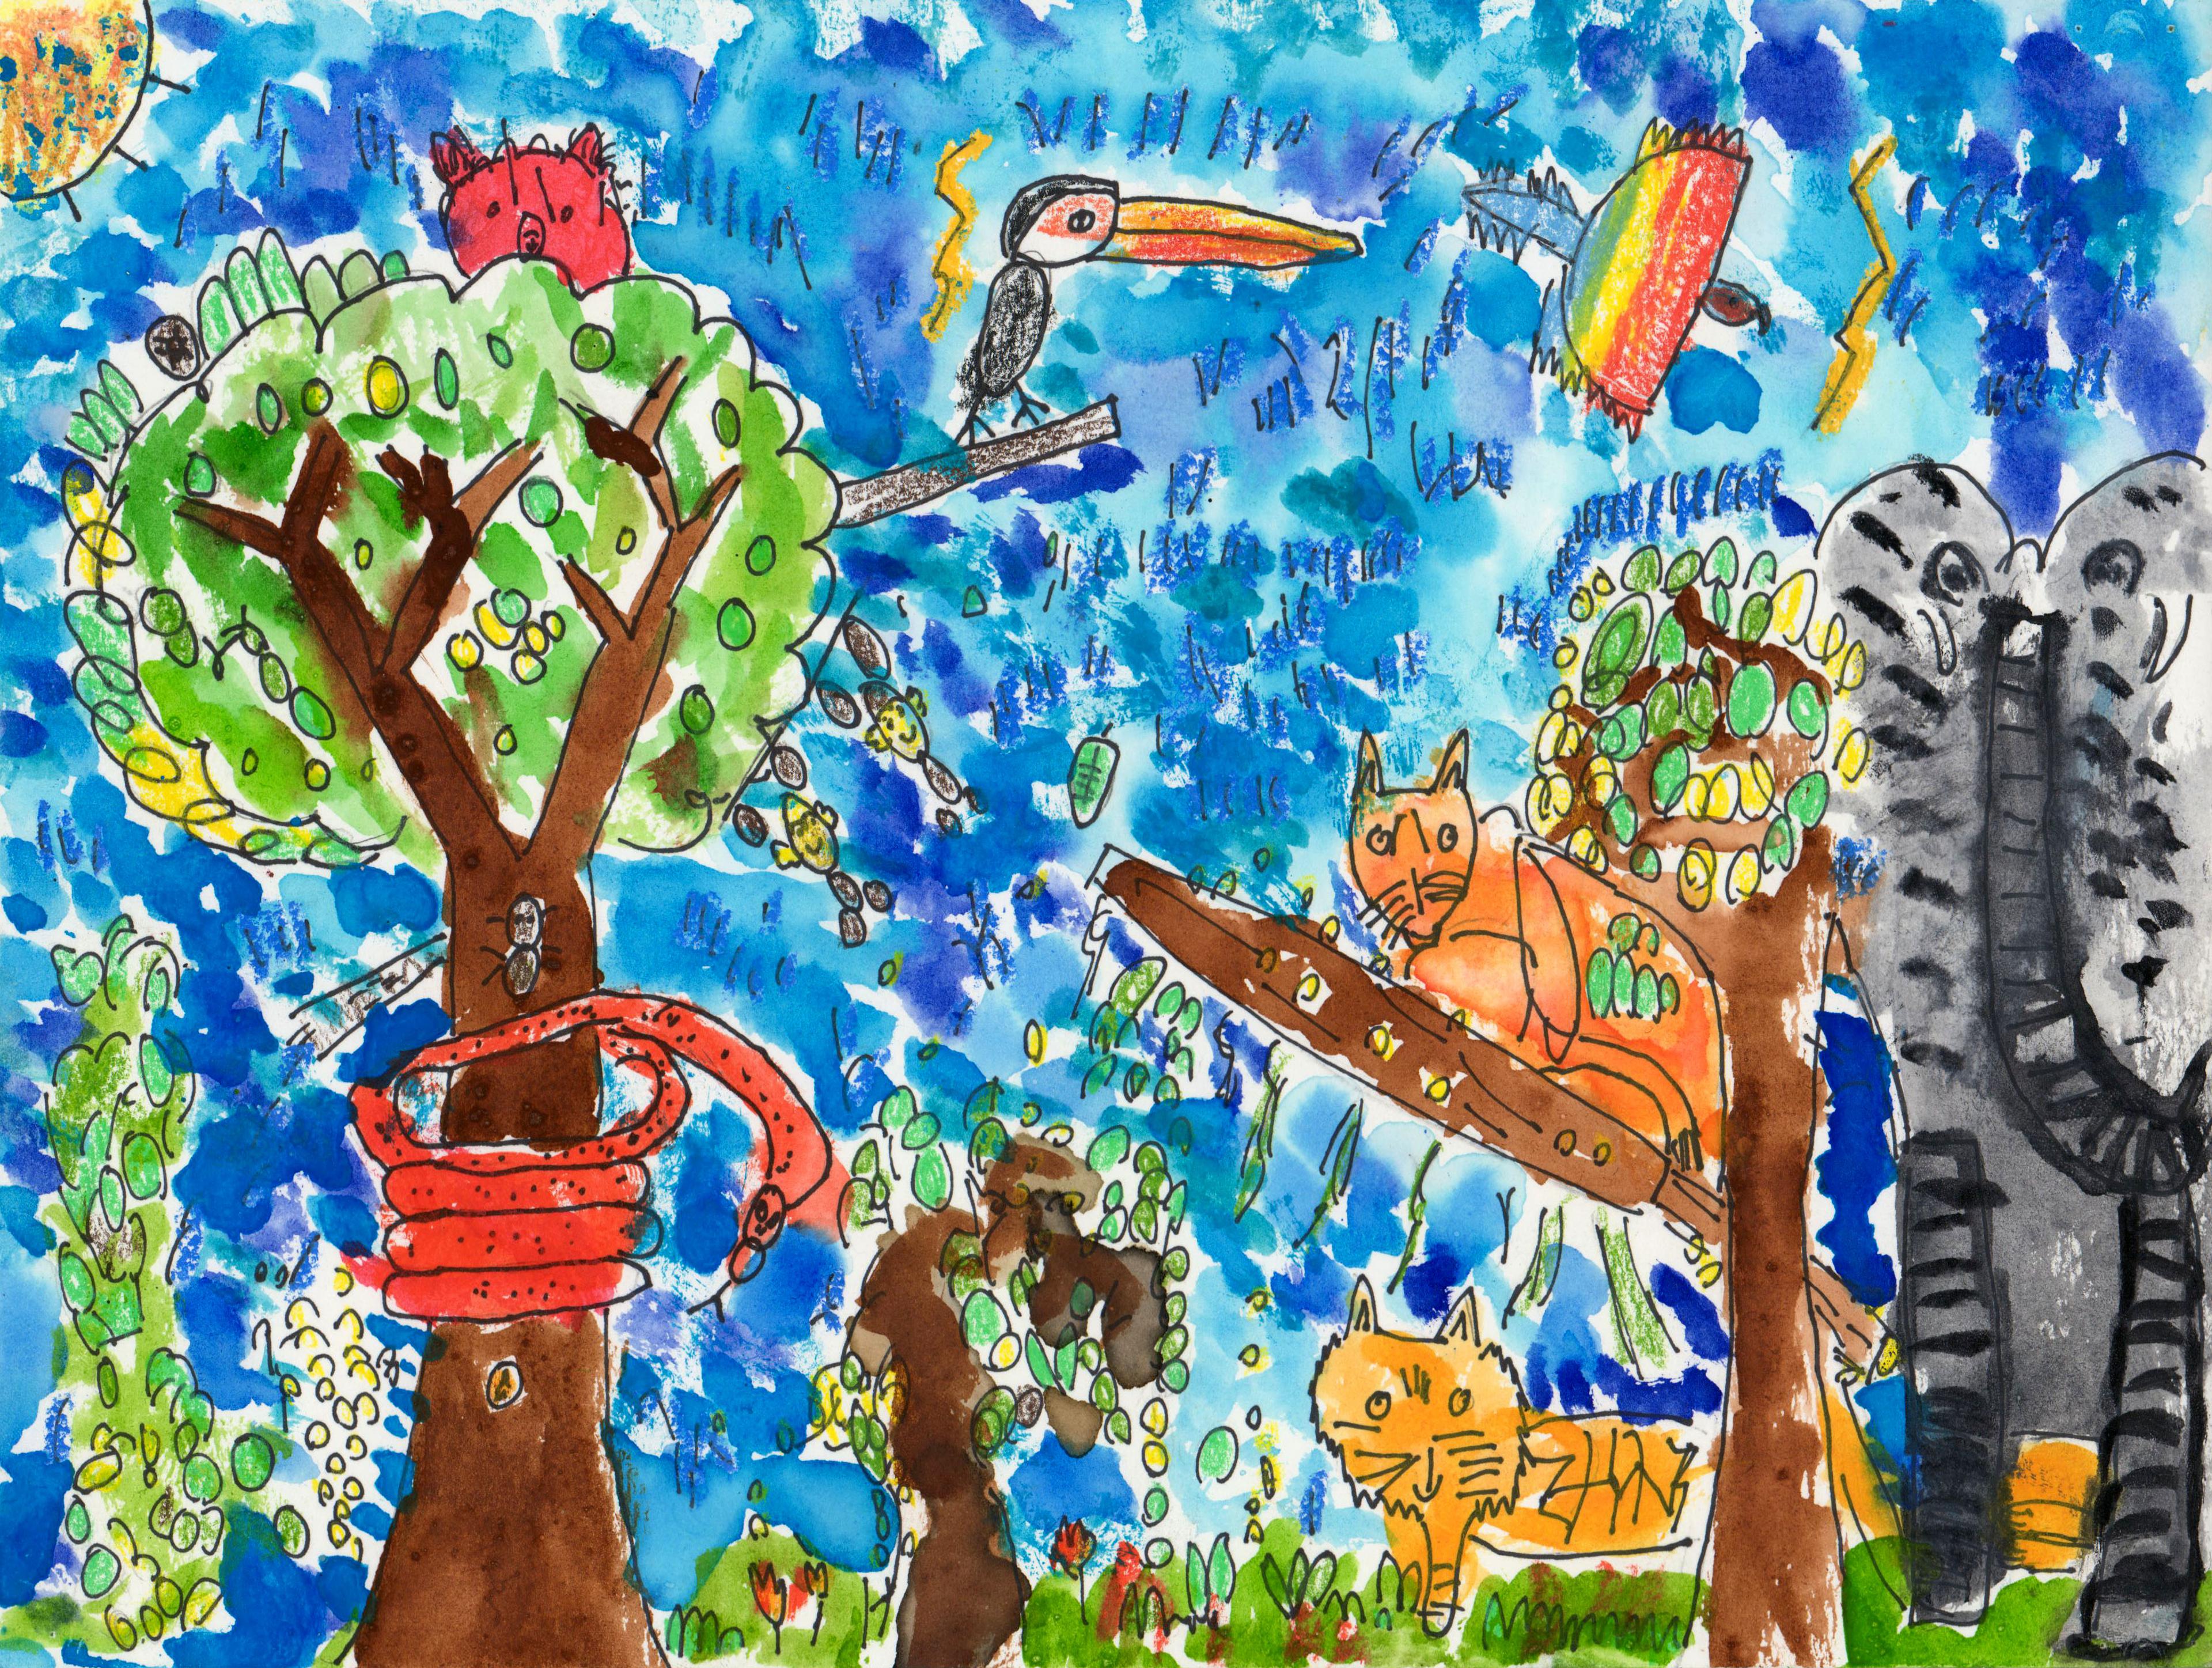 Mixed-media painting of a jungle scene filled with trees and animals. To the left, a red snake is wrapped several times around the brown trunk of a tall tree. An animal with a round, red face peers out from the green leaves at the top of the tree. A toucan perches on a branch that extends from the right side of the tree top. To the right, an orange lion stands in the grass and peers from behind another tree, while an orange tiger perches on a tree branch above that extends to the left. A large, tall, gray elephant stands to the right of the tree at the right side of the illustration. A green, yellow, and red animal flies above the tree to the right. The sky is blue and a yellow sun shines at the top left corner of the illustration.